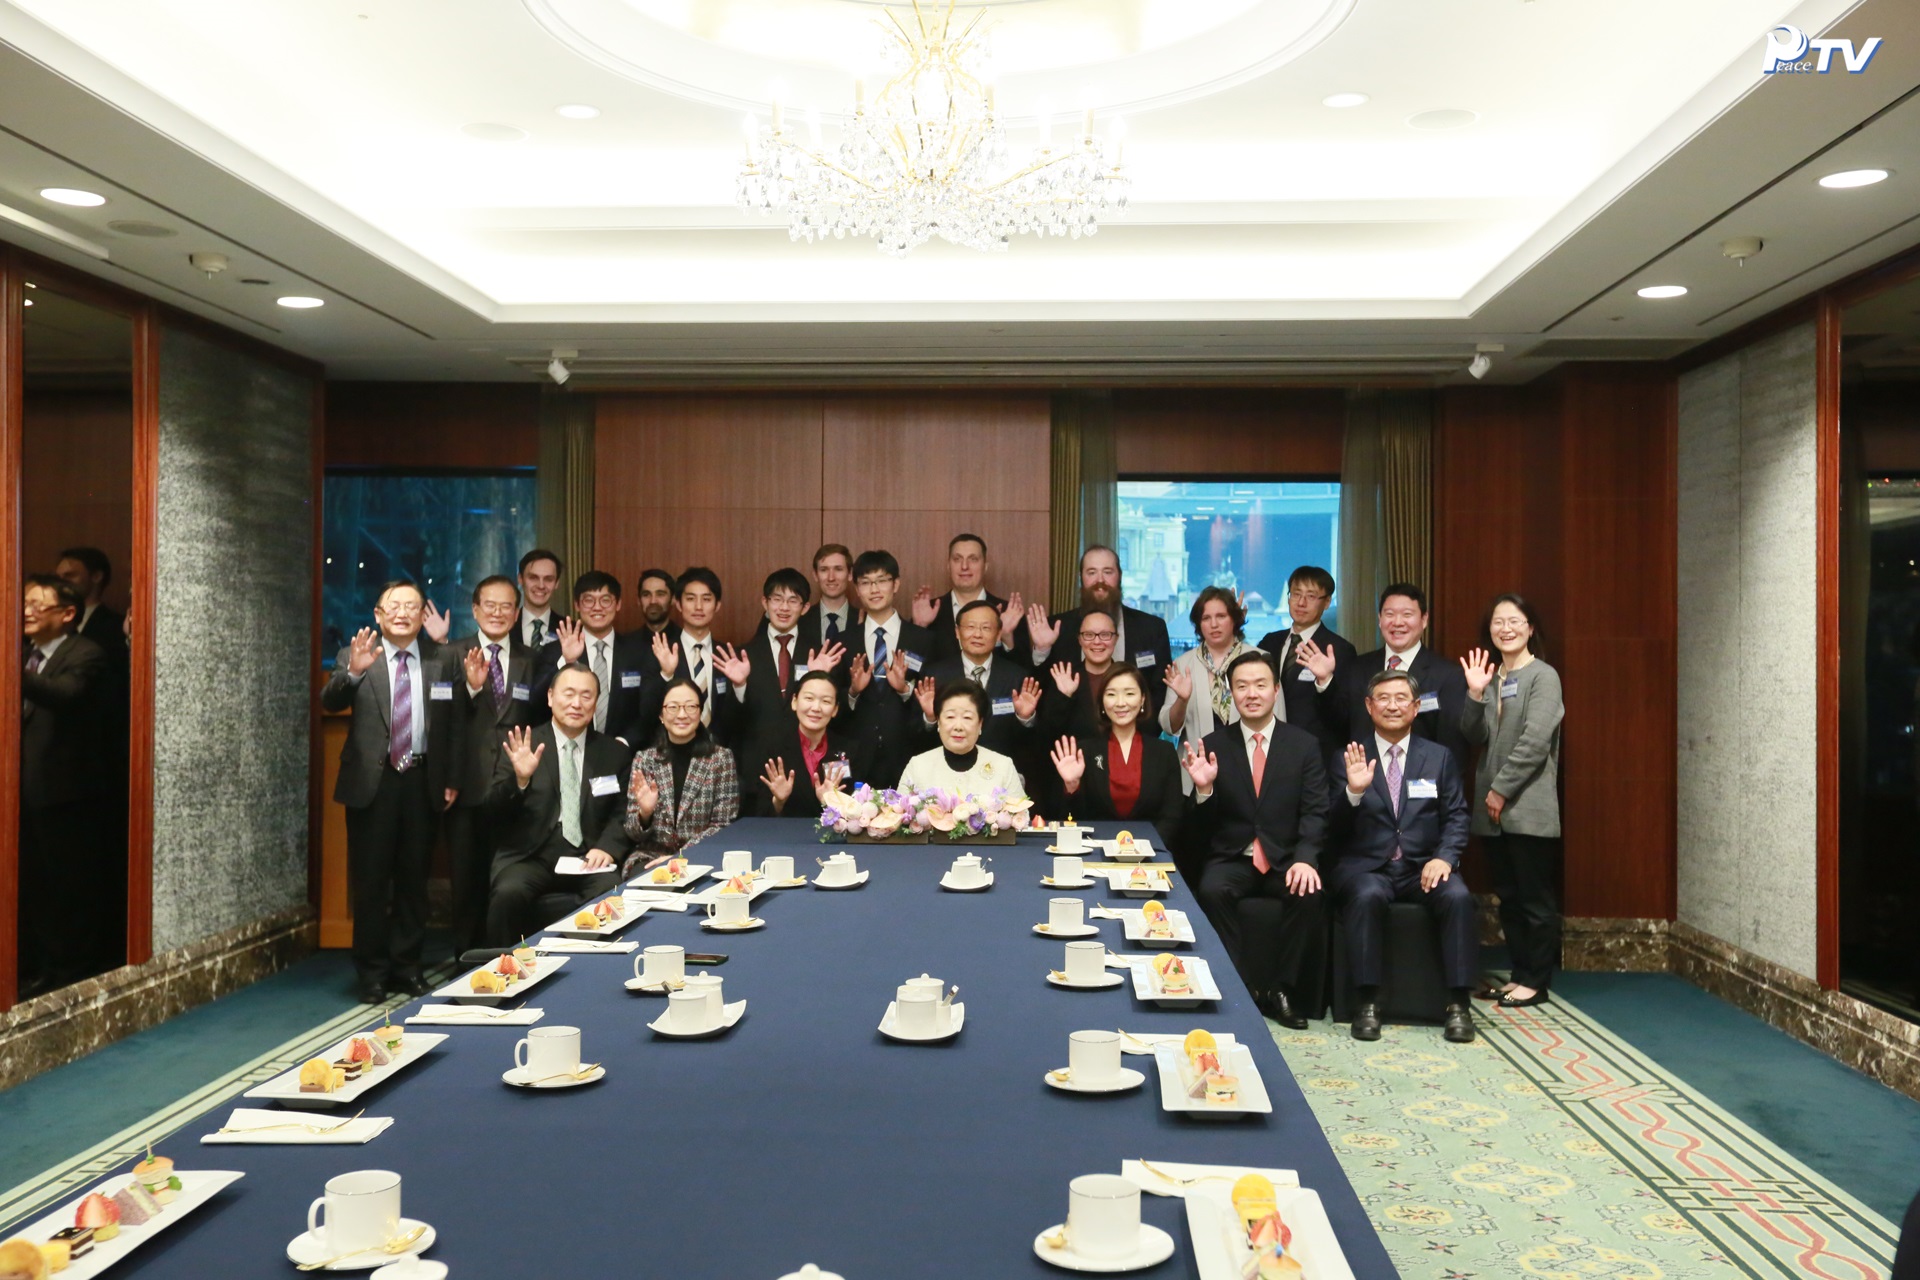 24th ICUS (February 23-24, Jamsil Lotte Hotel)